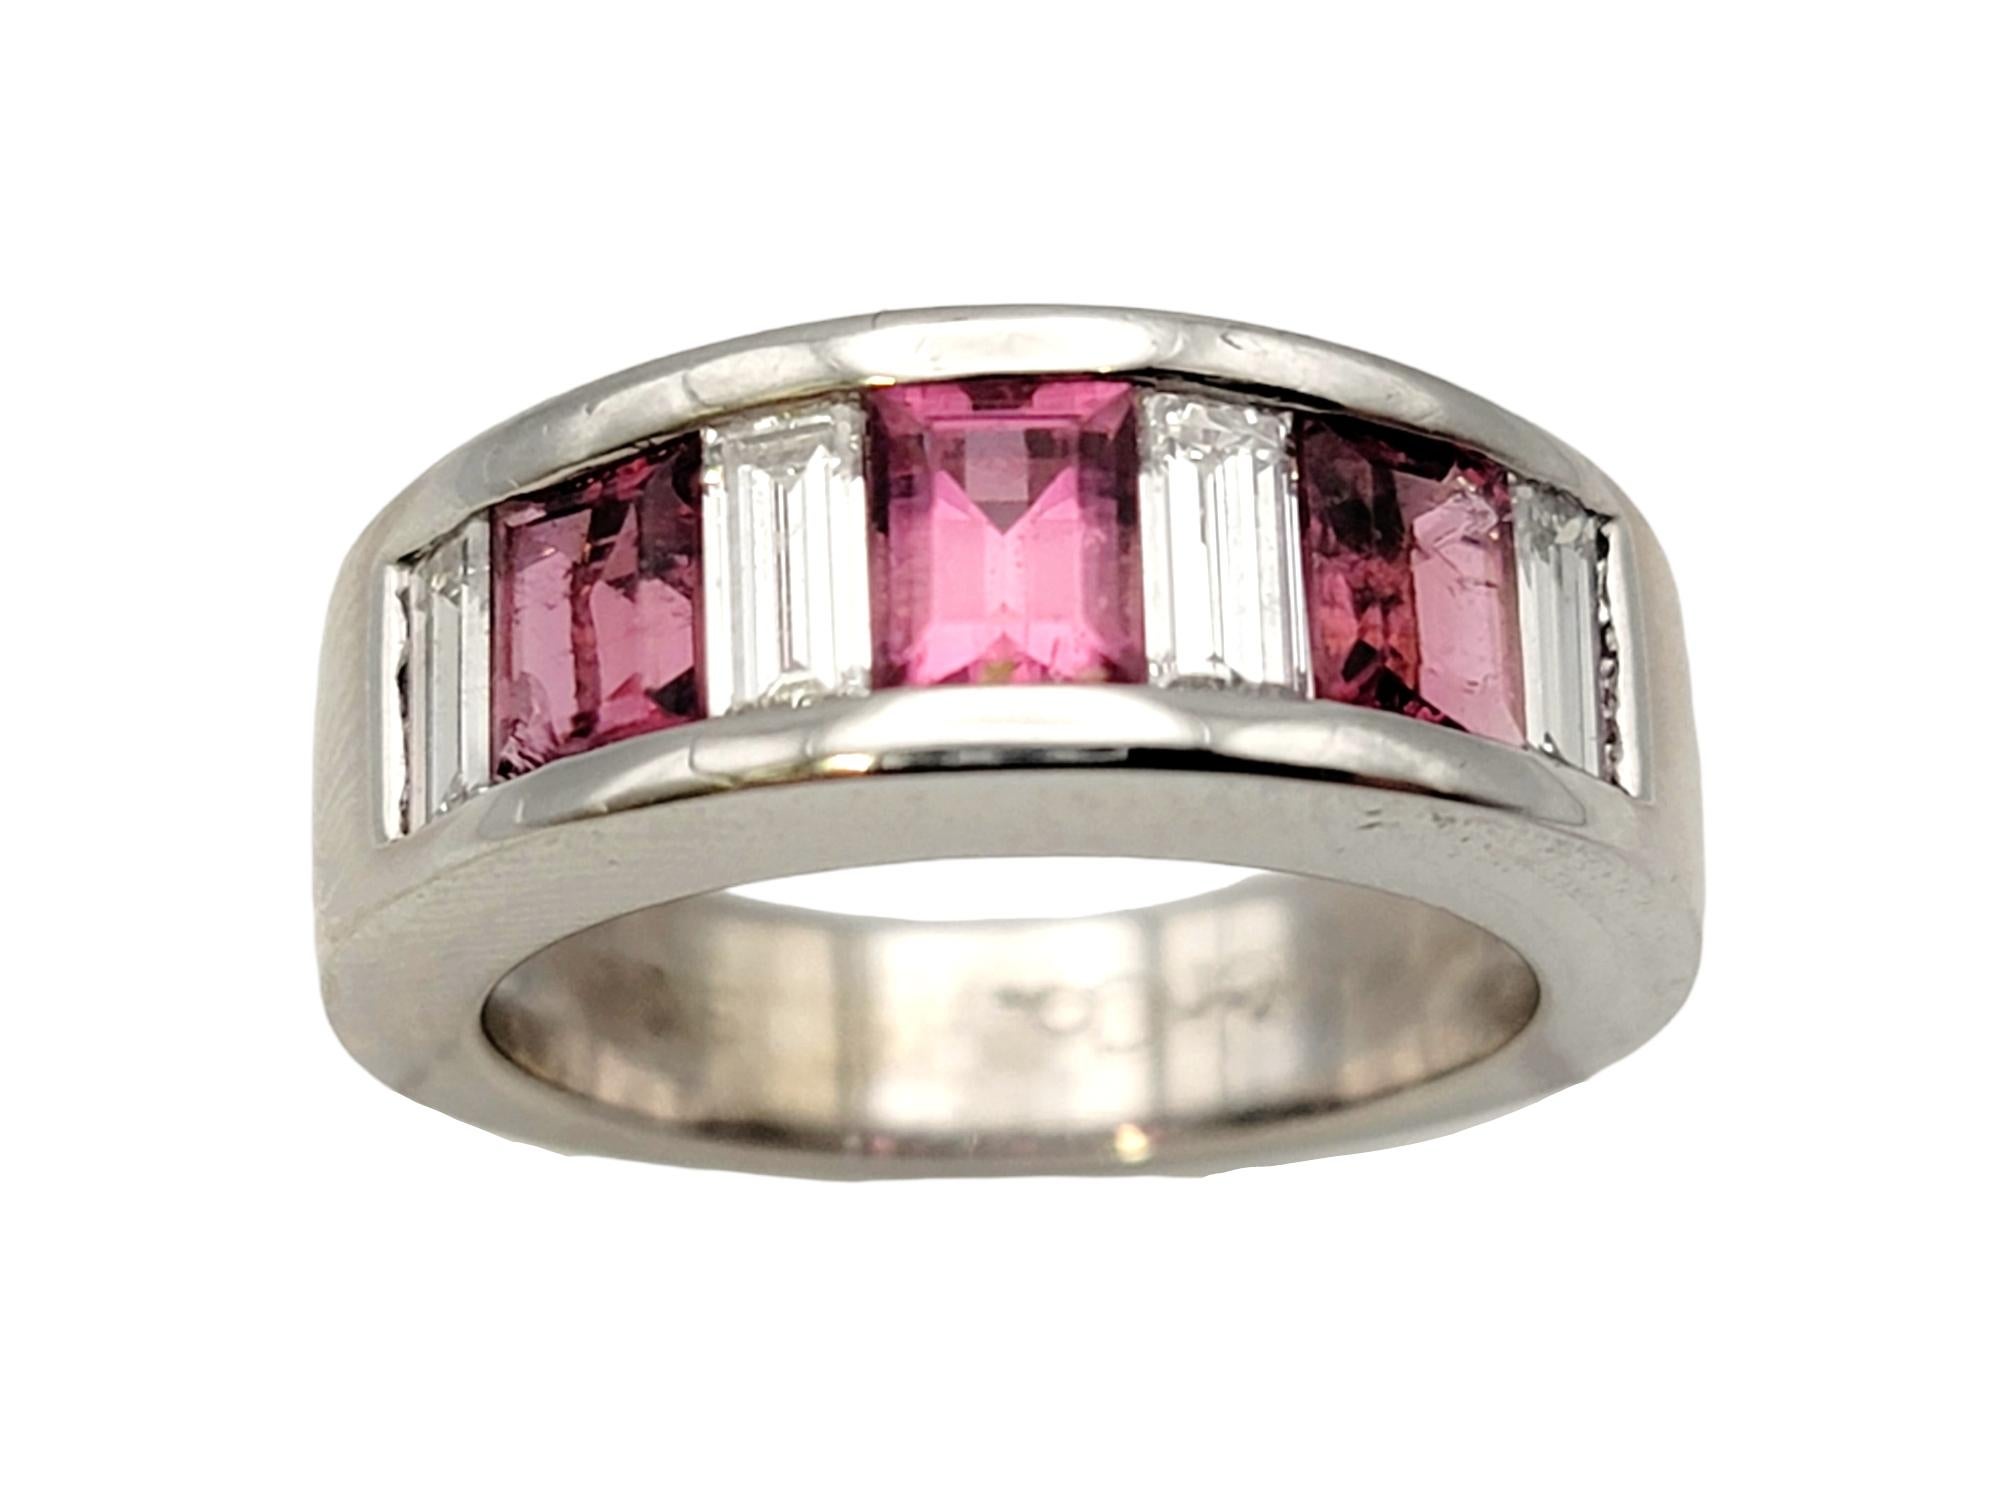 Ring size: 6.25

Absolutely gorgeous diamond and pink tourmaline band ring. The bright pink stones really pop against the icy white diamonds, creating an elegant and ultra feminine piece. 

Ring type: Band
Metal: 18K White Gold
Ring size: